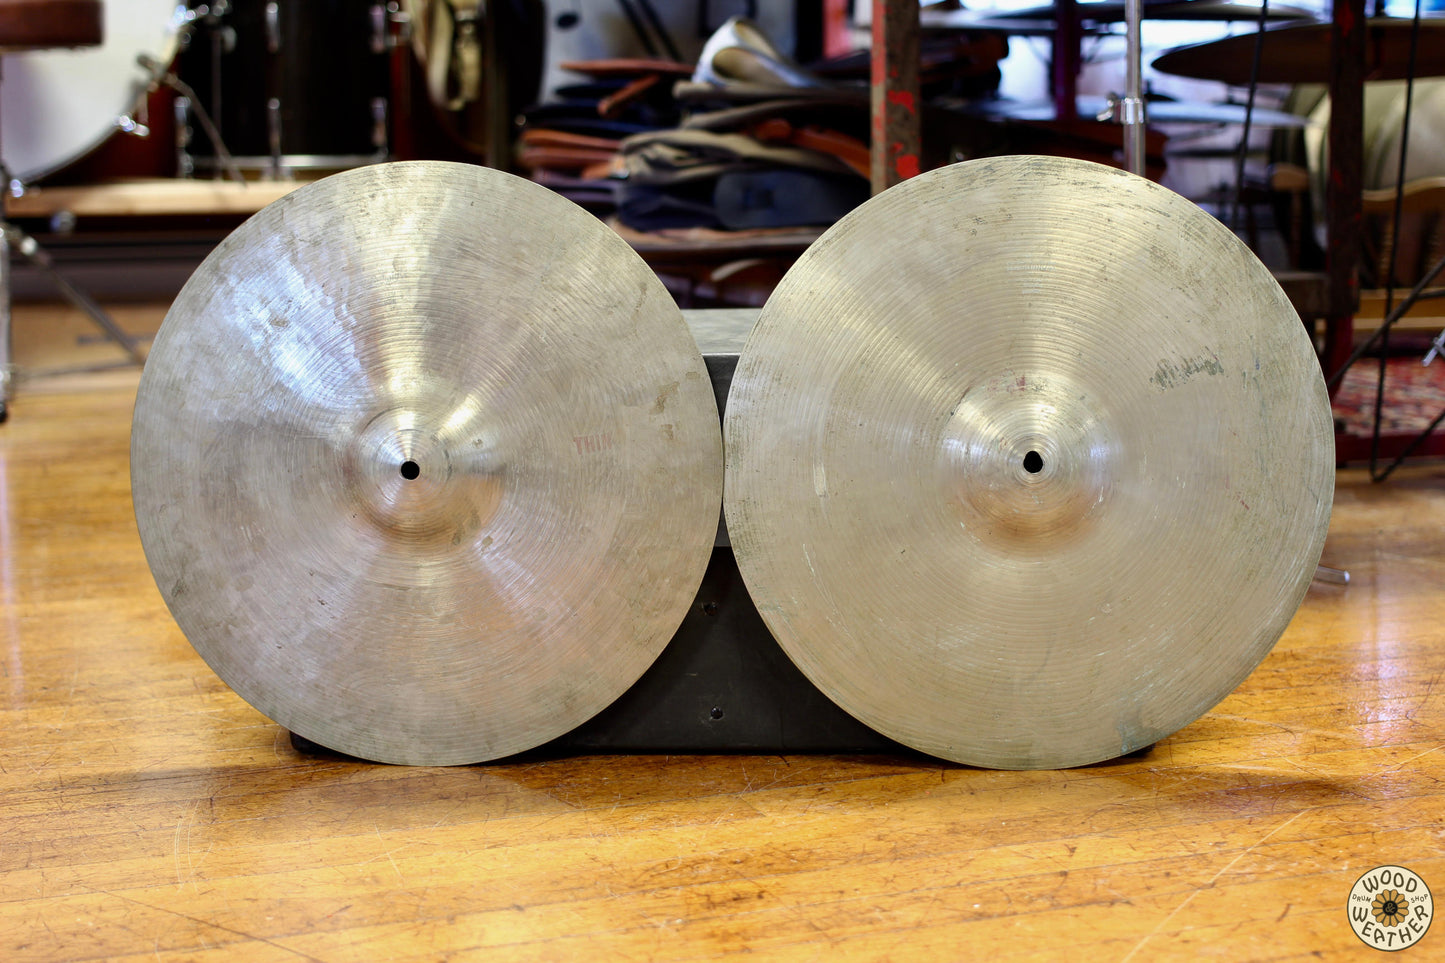 1950s/60s Paiste Ludwig 15" Thin Hi-Hat Cymbals 850/860g